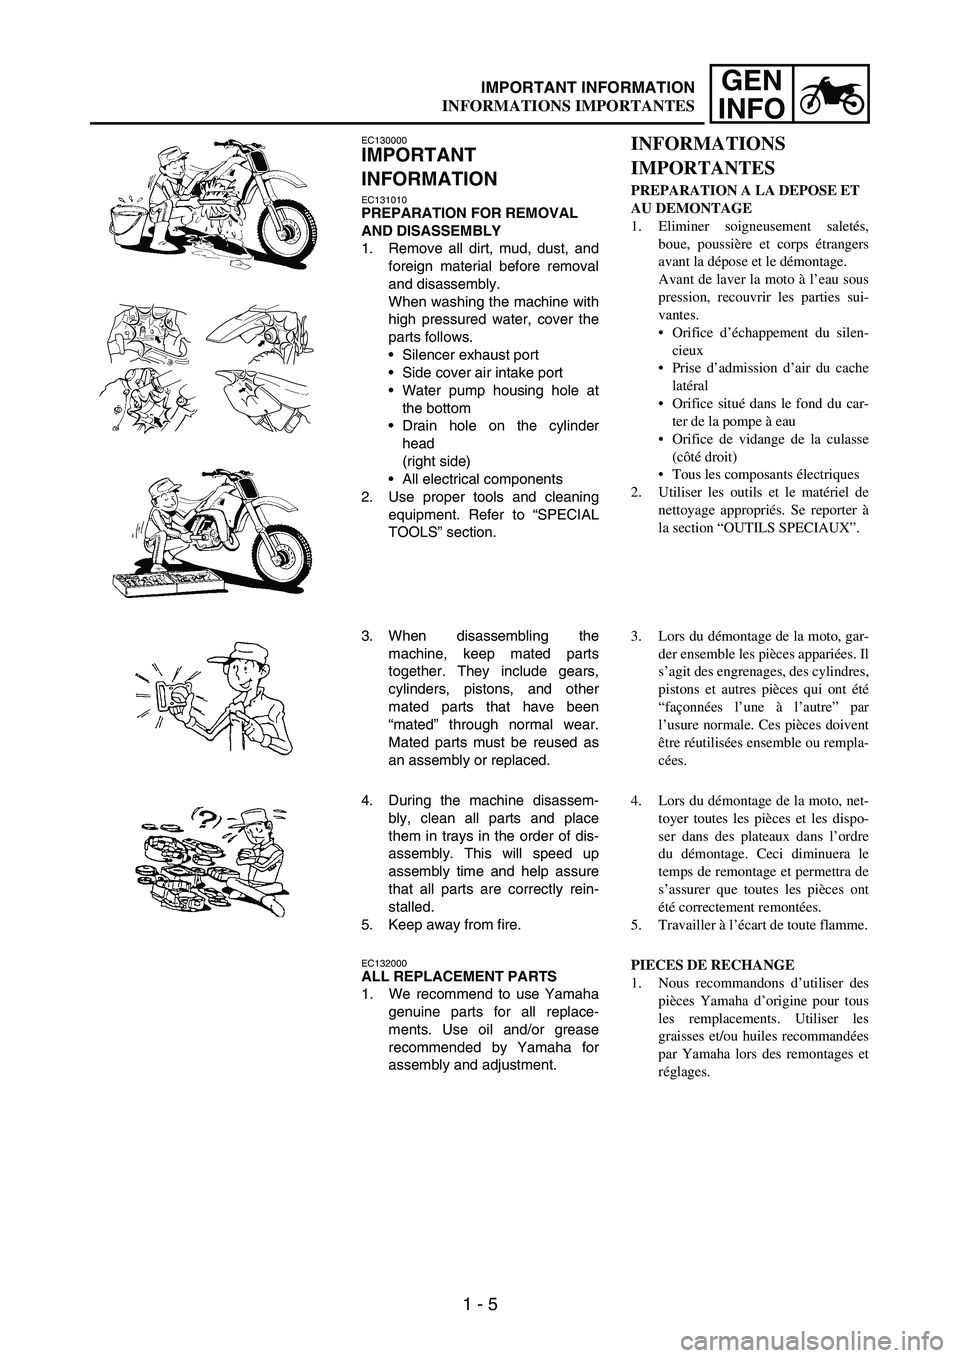 YAMAHA WR 250F 2005  Notices Demploi (in French) 1 - 5
GEN
INFOIMPORTANT INFORMATION
EC130000
IMPORTANT 
INFORMATION
EC131010PREPARATION FOR REMOVAL 
AND DISASSEMBLY
1. Remove all dirt, mud, dust, and
foreign material before removal
and disassembly.